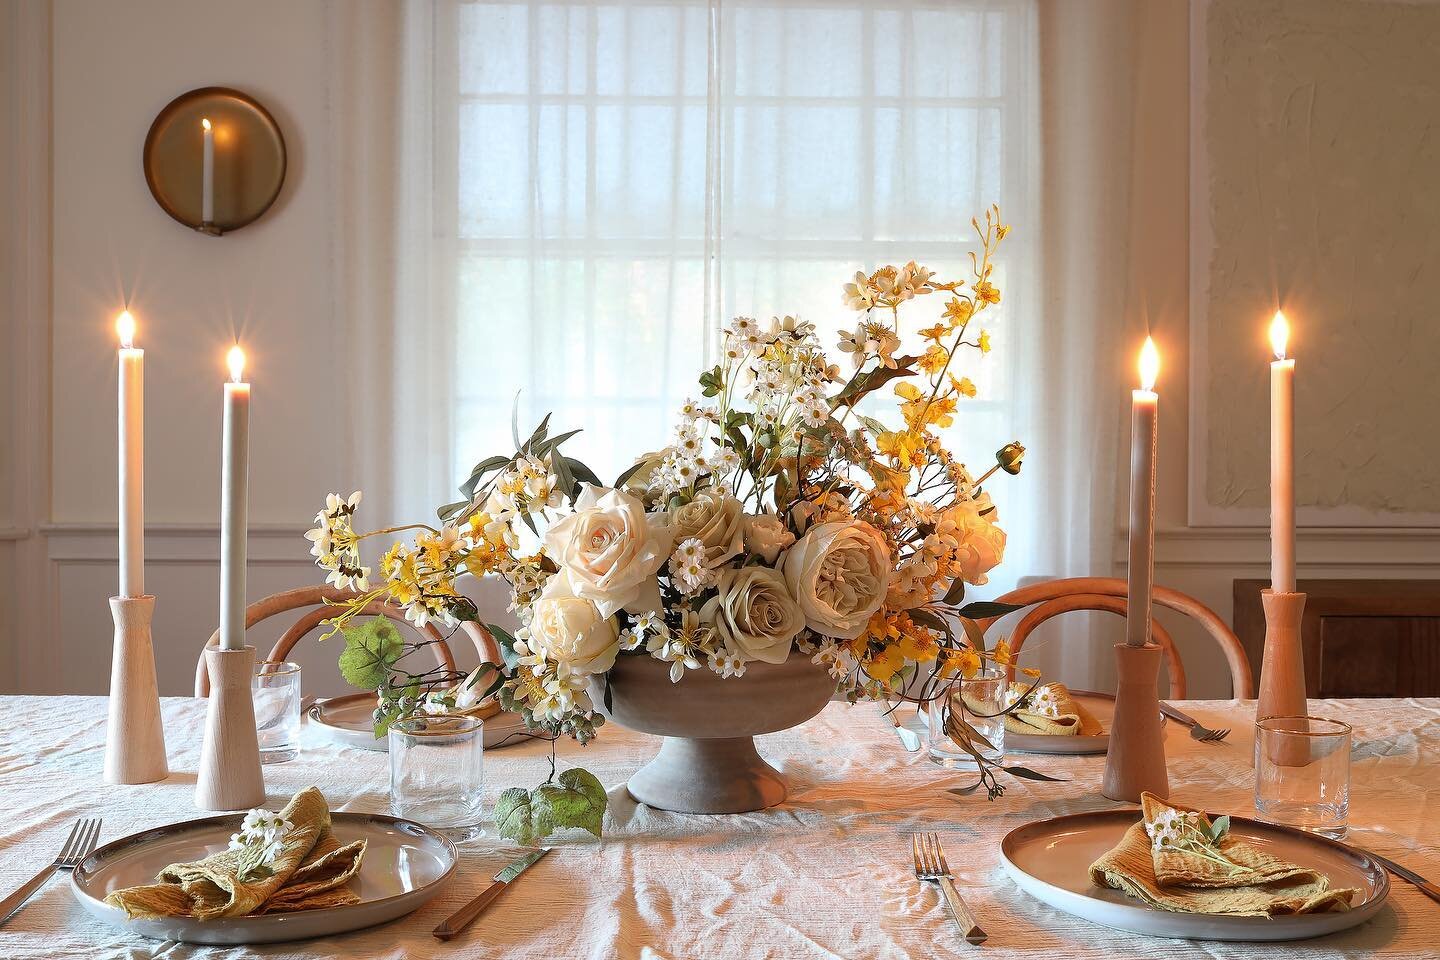 I (finally) have an LTK shop where I can share links and sources! Starting with this spring tablescape that would be lovely for Easter or Passover. I popped the link in my Stories as well as some other spring decor and recipe ideas. You can also find